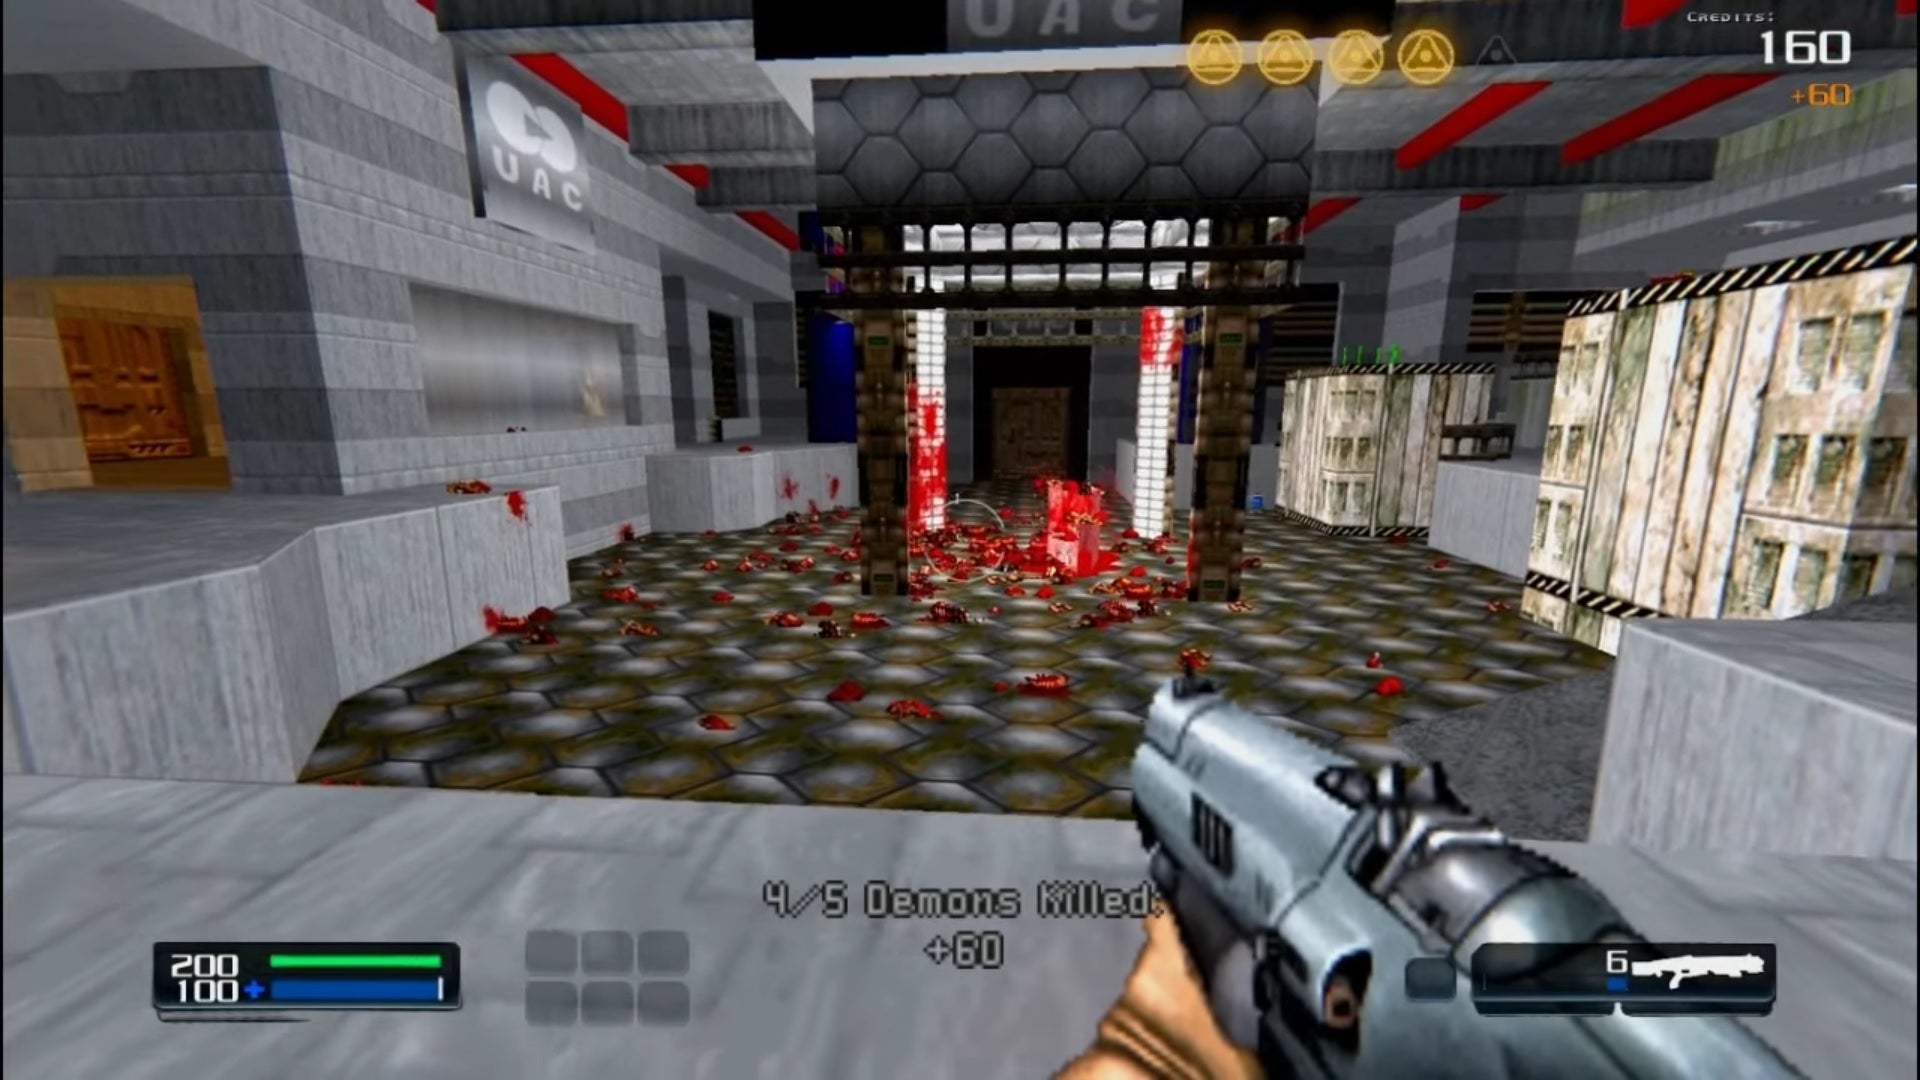 Image for Doom 2016 is still a blast when recreated in Doom 2